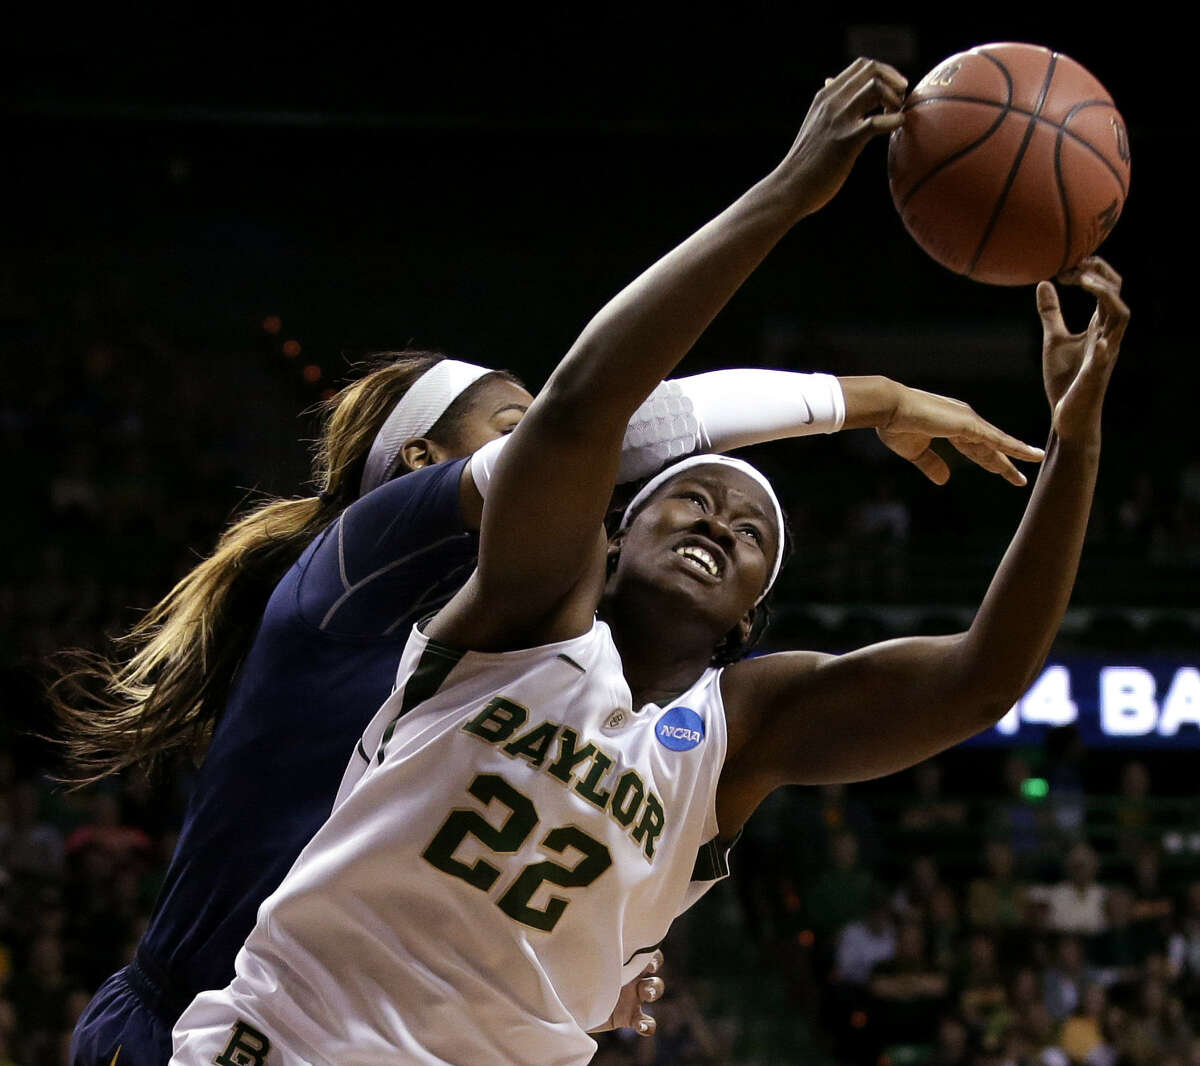 Baylor's Sune Agbuke grabs a rebound in front of California's Reshanda Gray. The Lady Bears led just 34-33 at halftime.